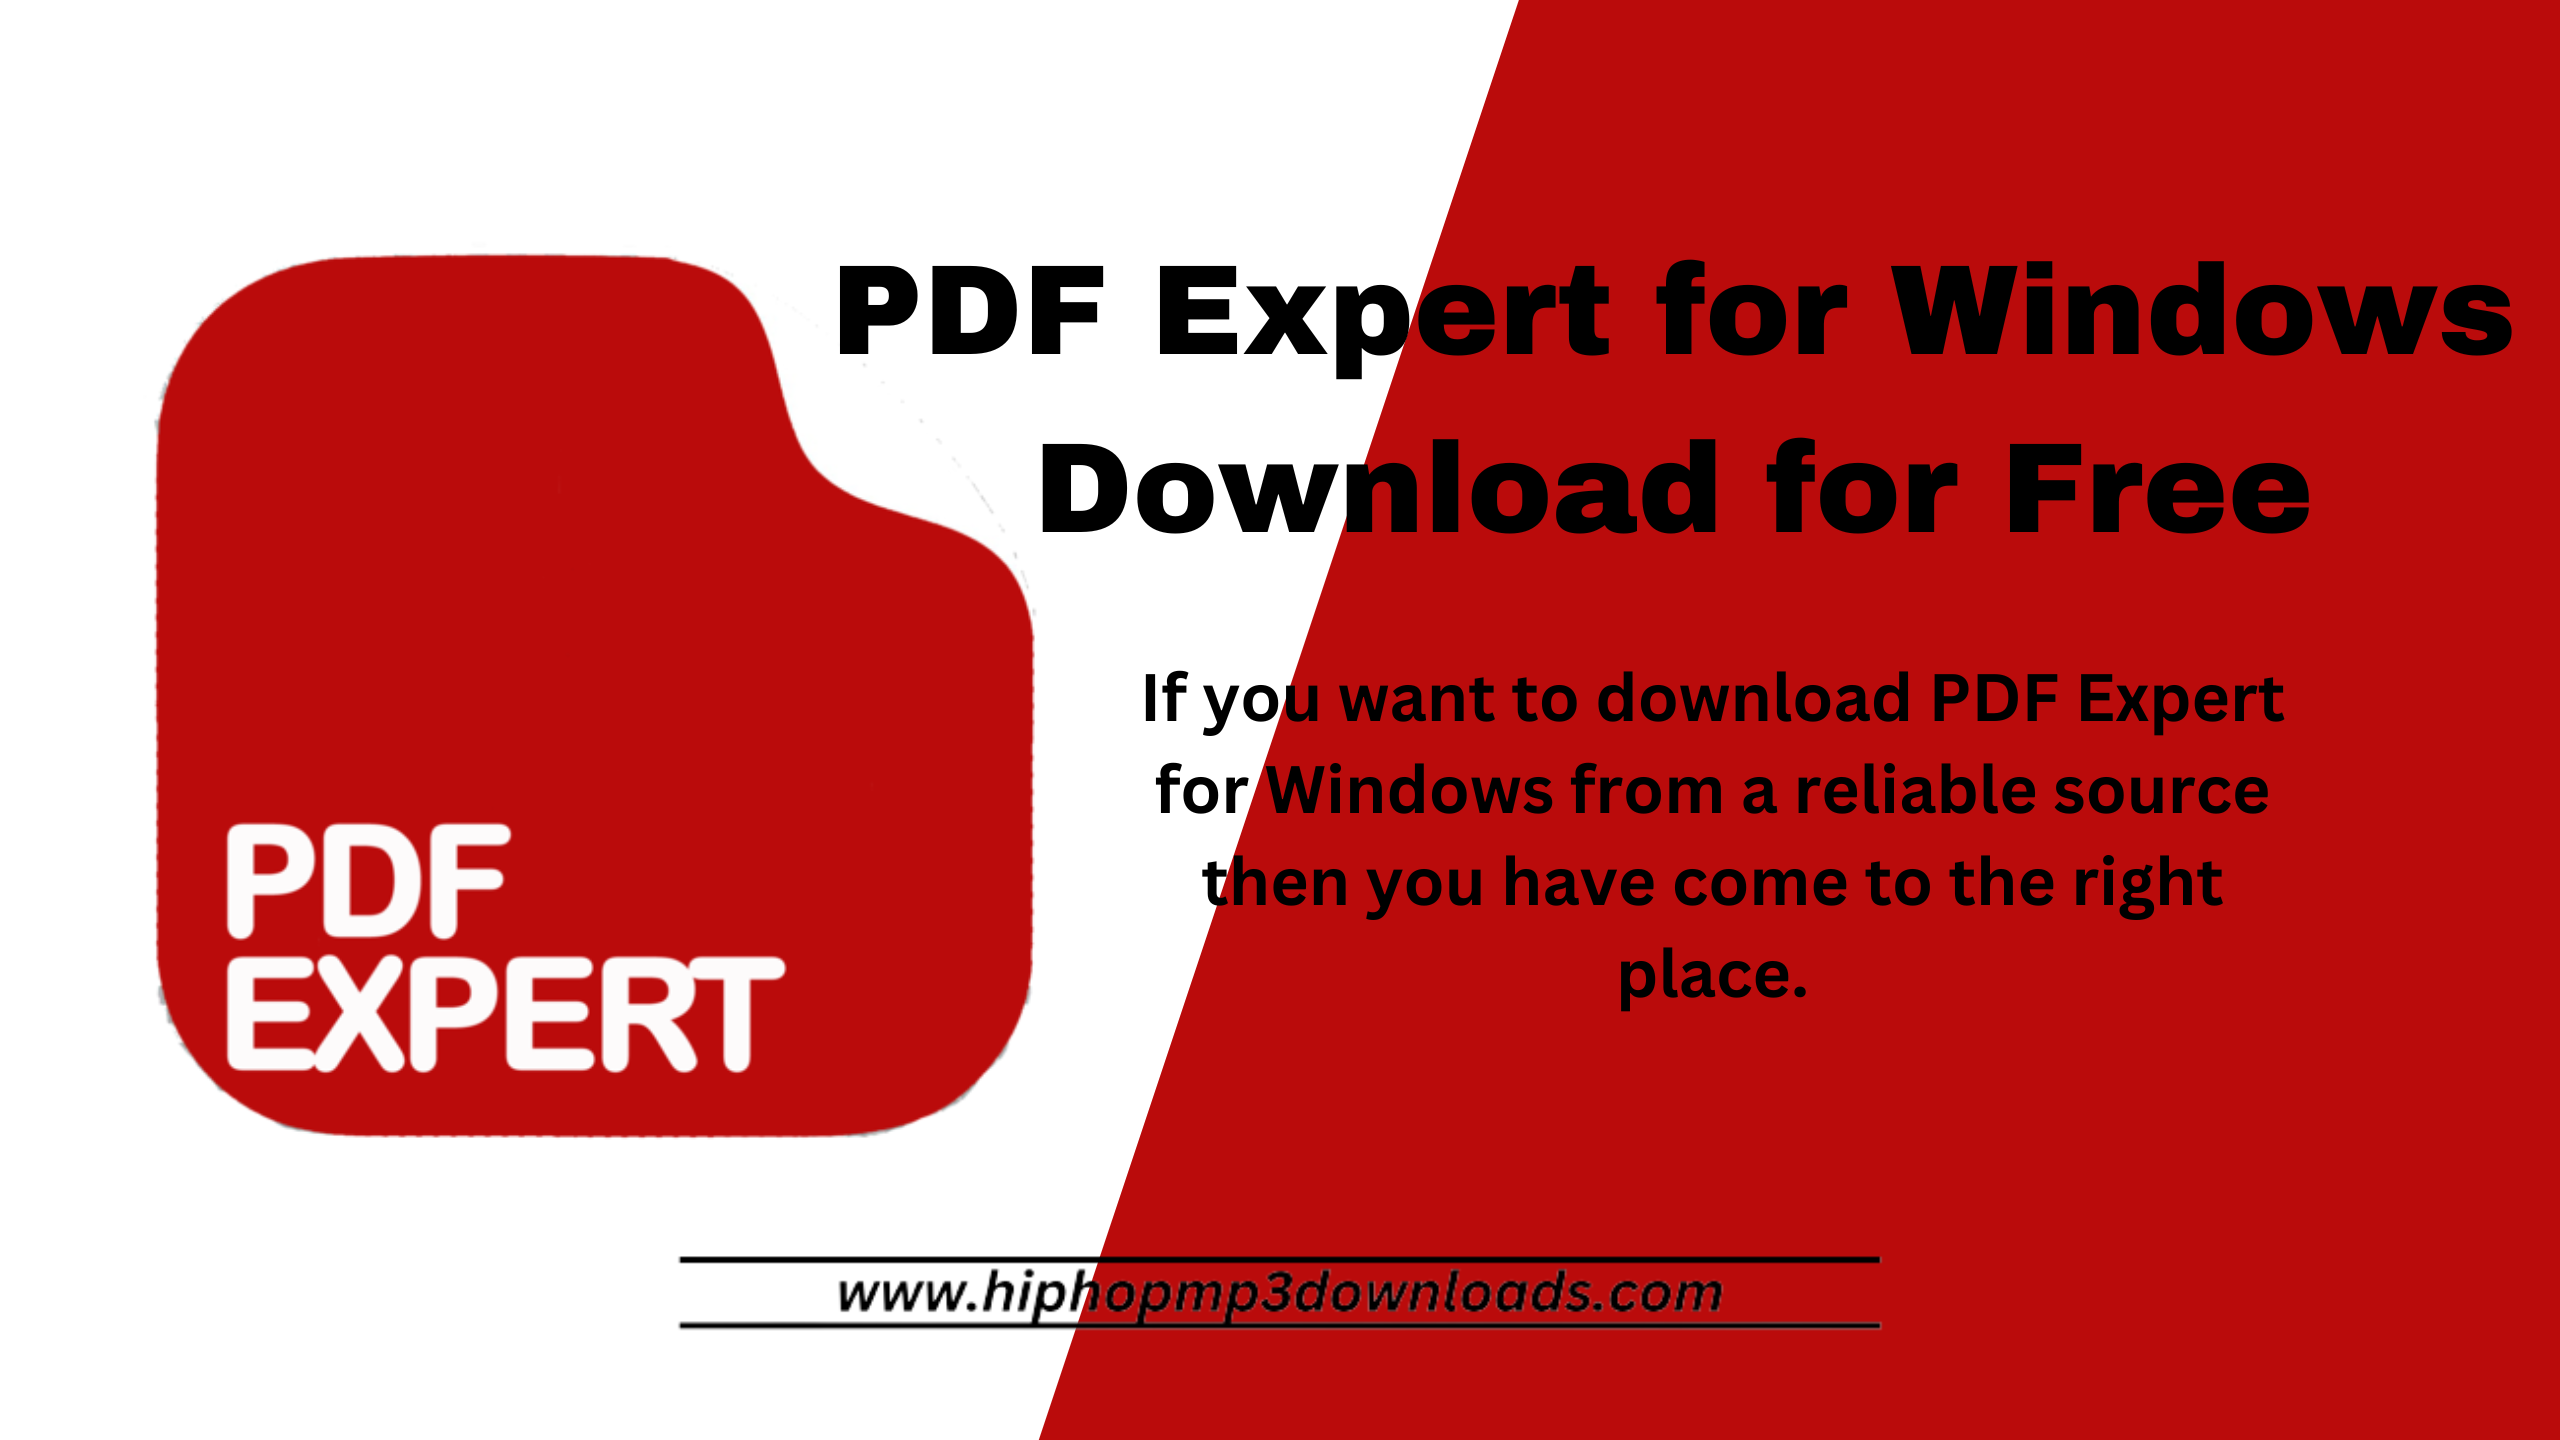 PDF Expert for Windows Download for Free